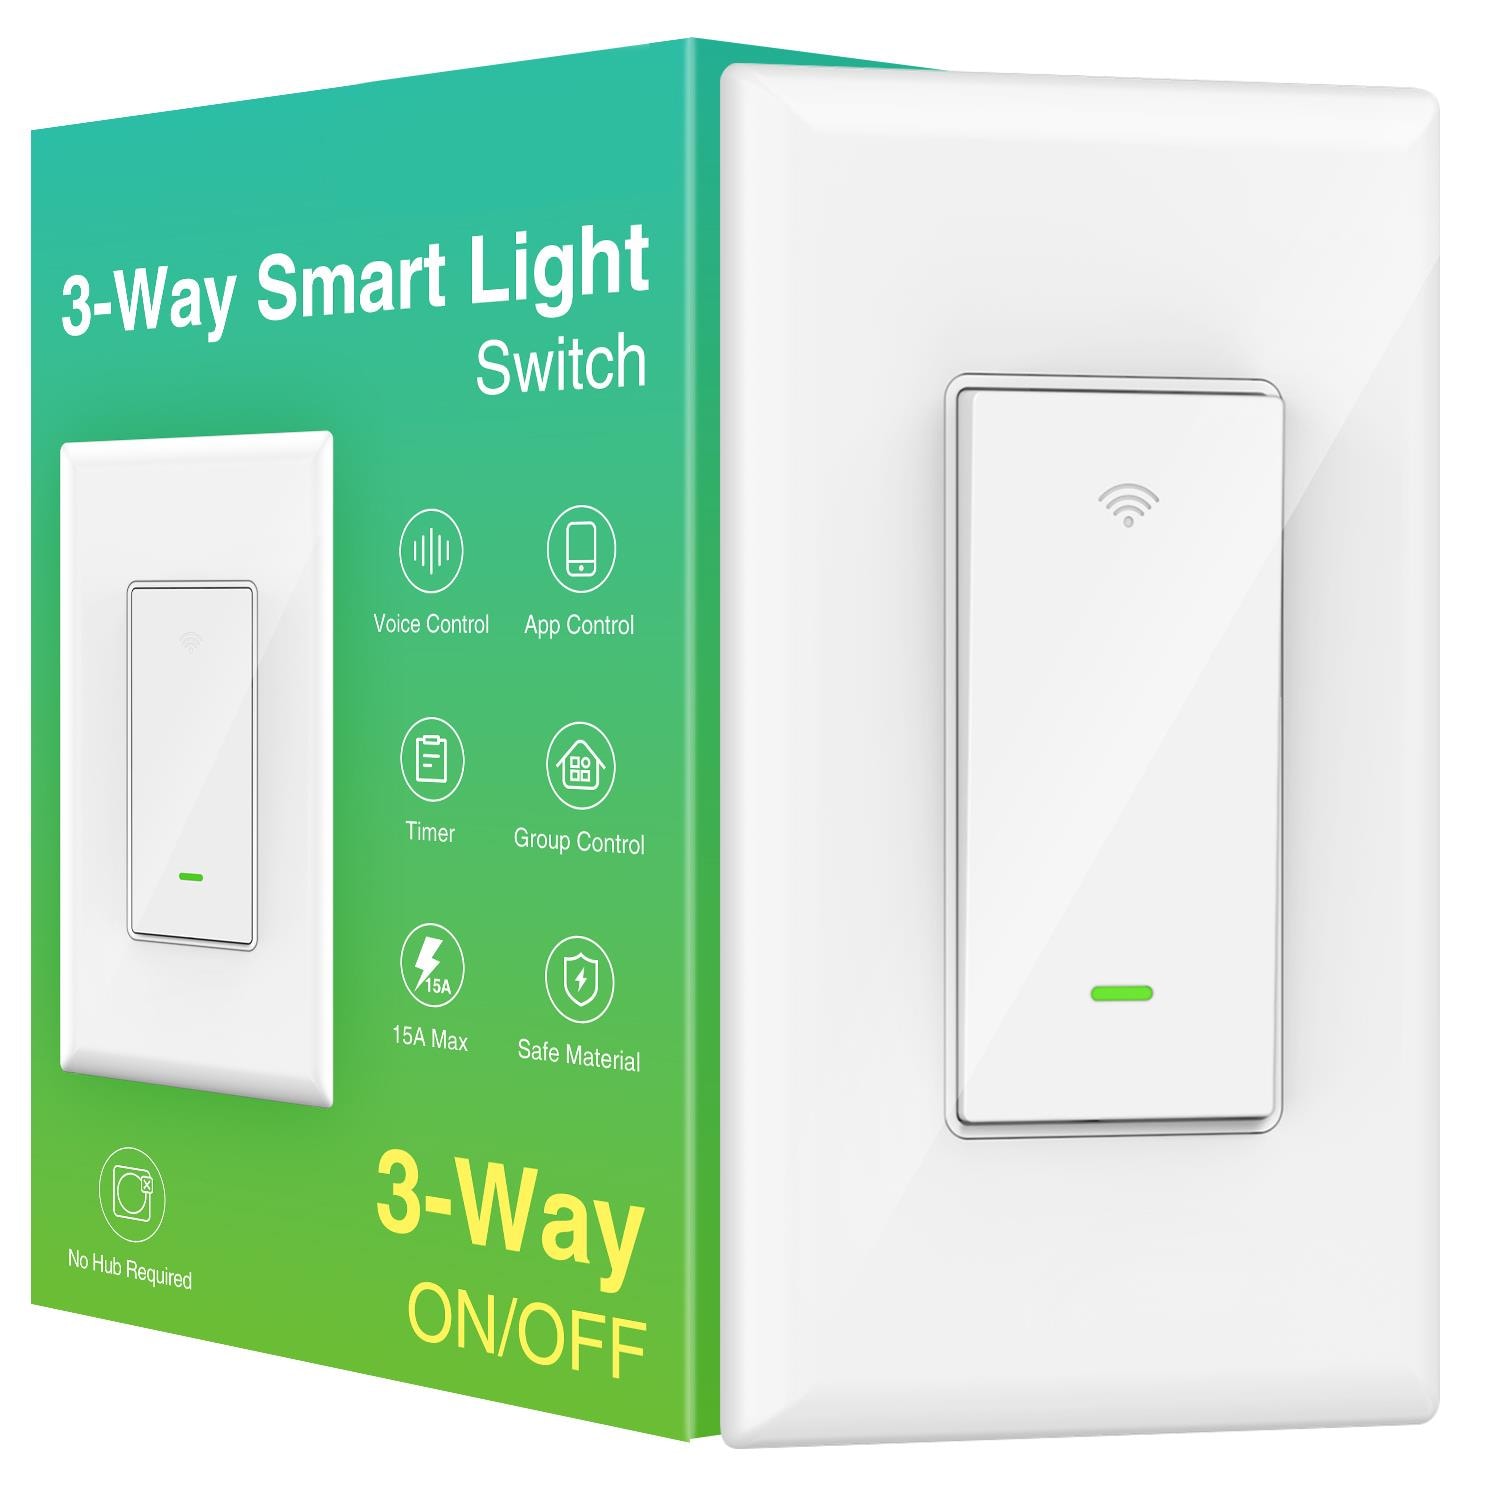 Gosund WiFi Smart Light Switch, On-Off In-Wall, Single Pole - Light Switch  works by voice through Alexa or Google Assistant, by remote with phone app,  or manually, White Smart Switch, 15A, 2